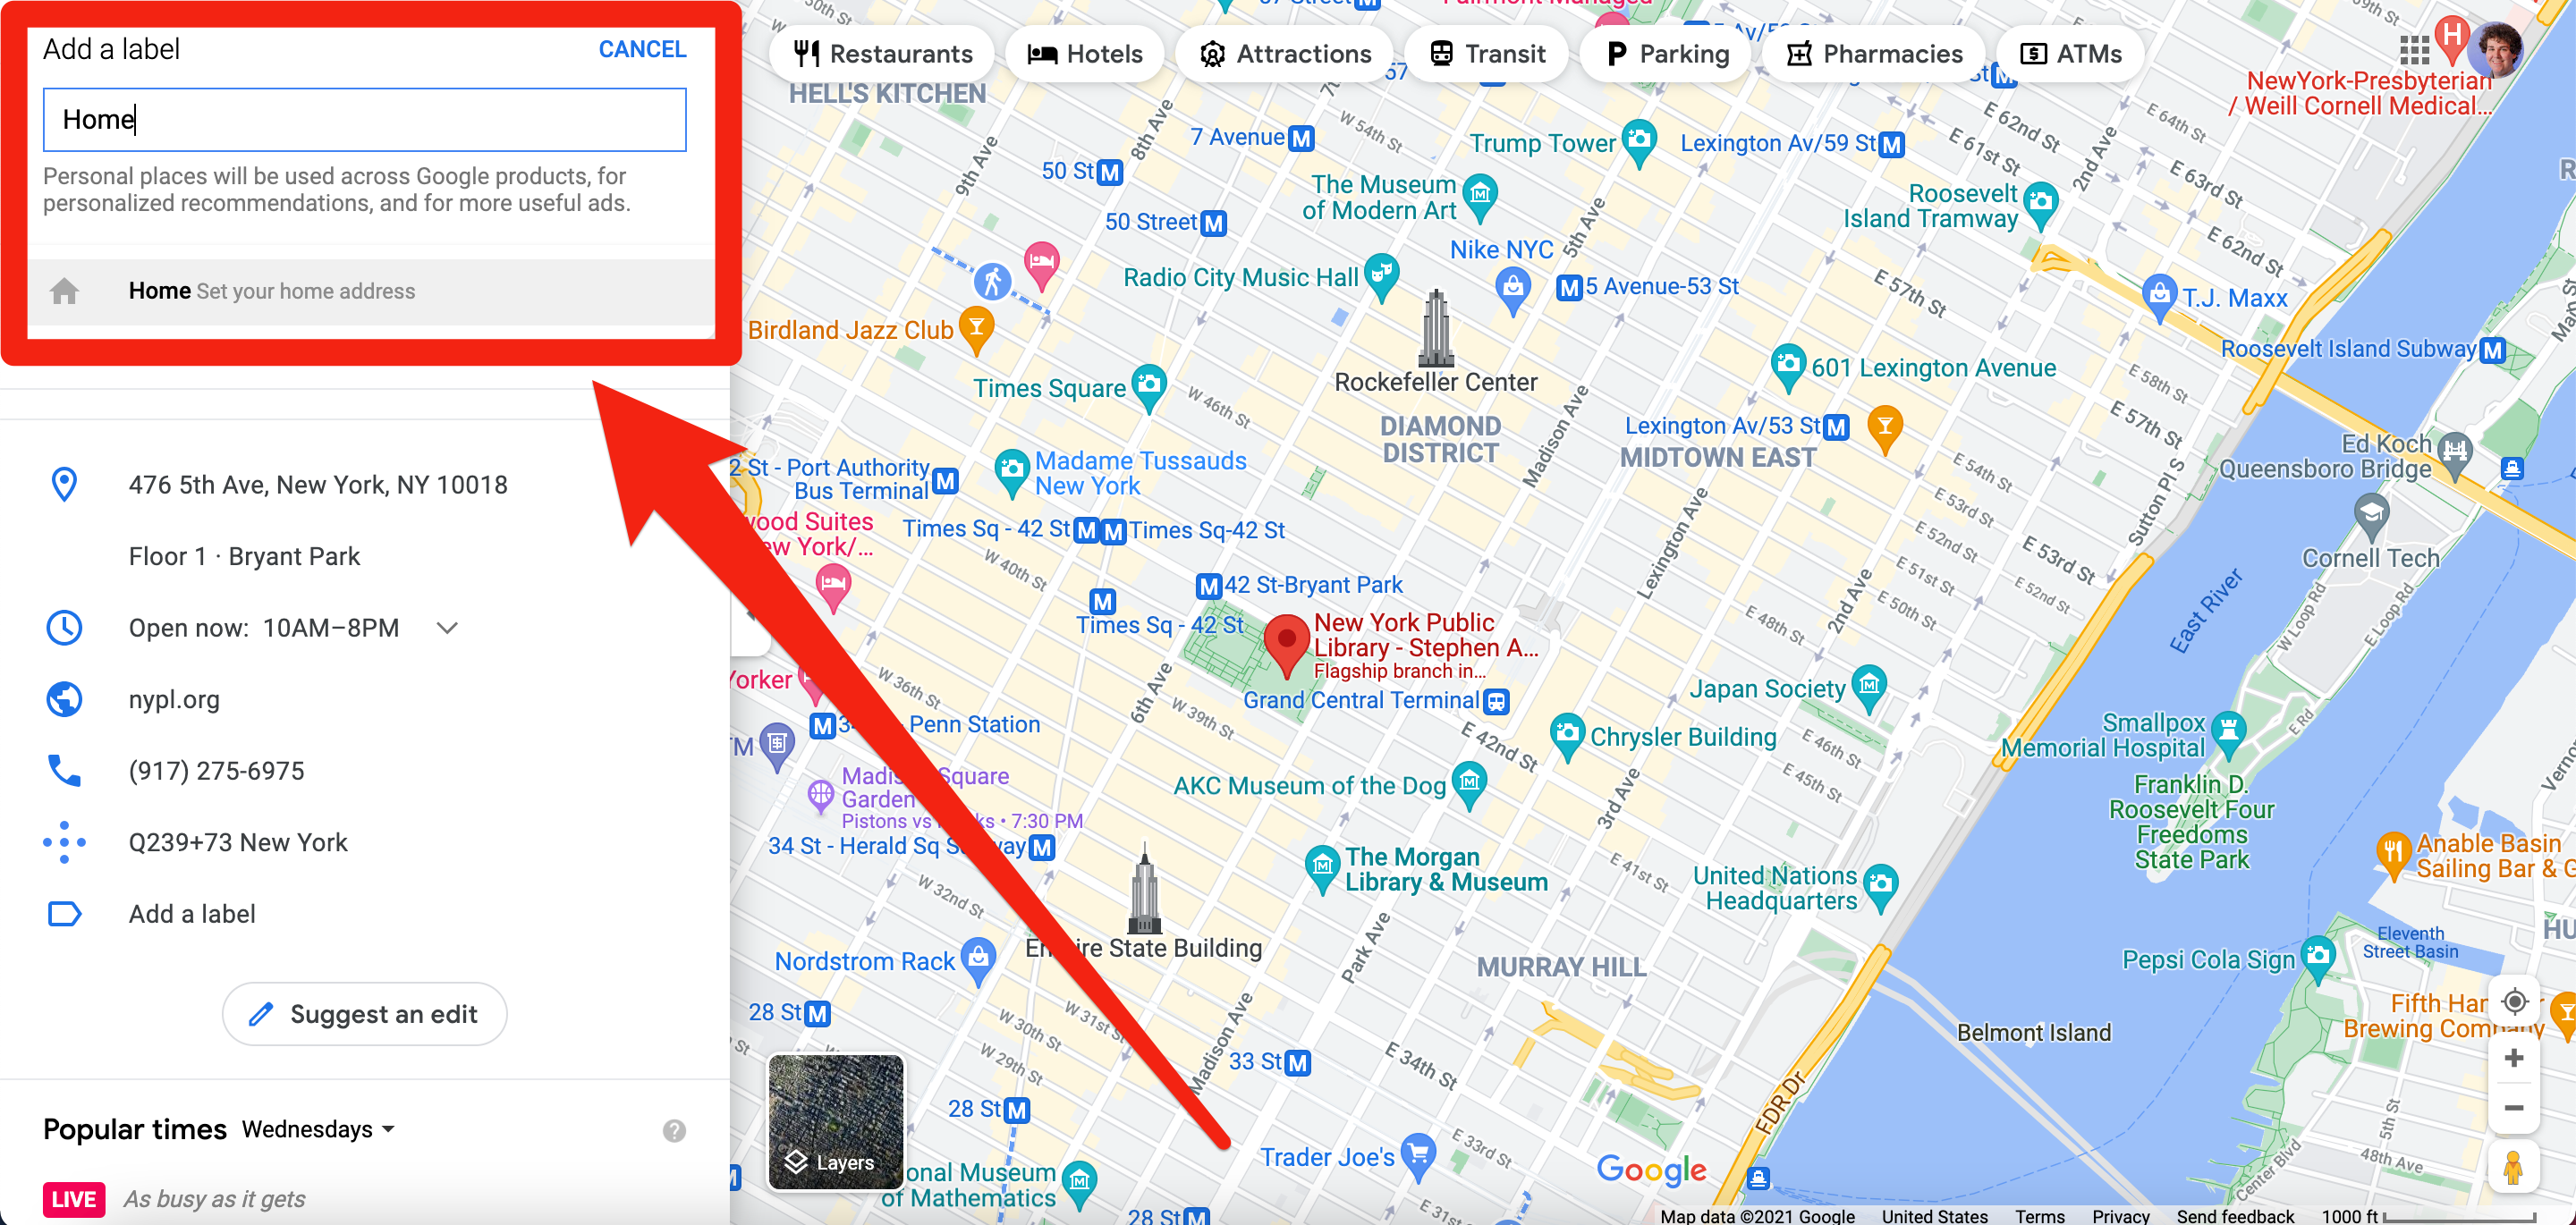 A Google Maps screenshot where the user is labeling a location as "Home."